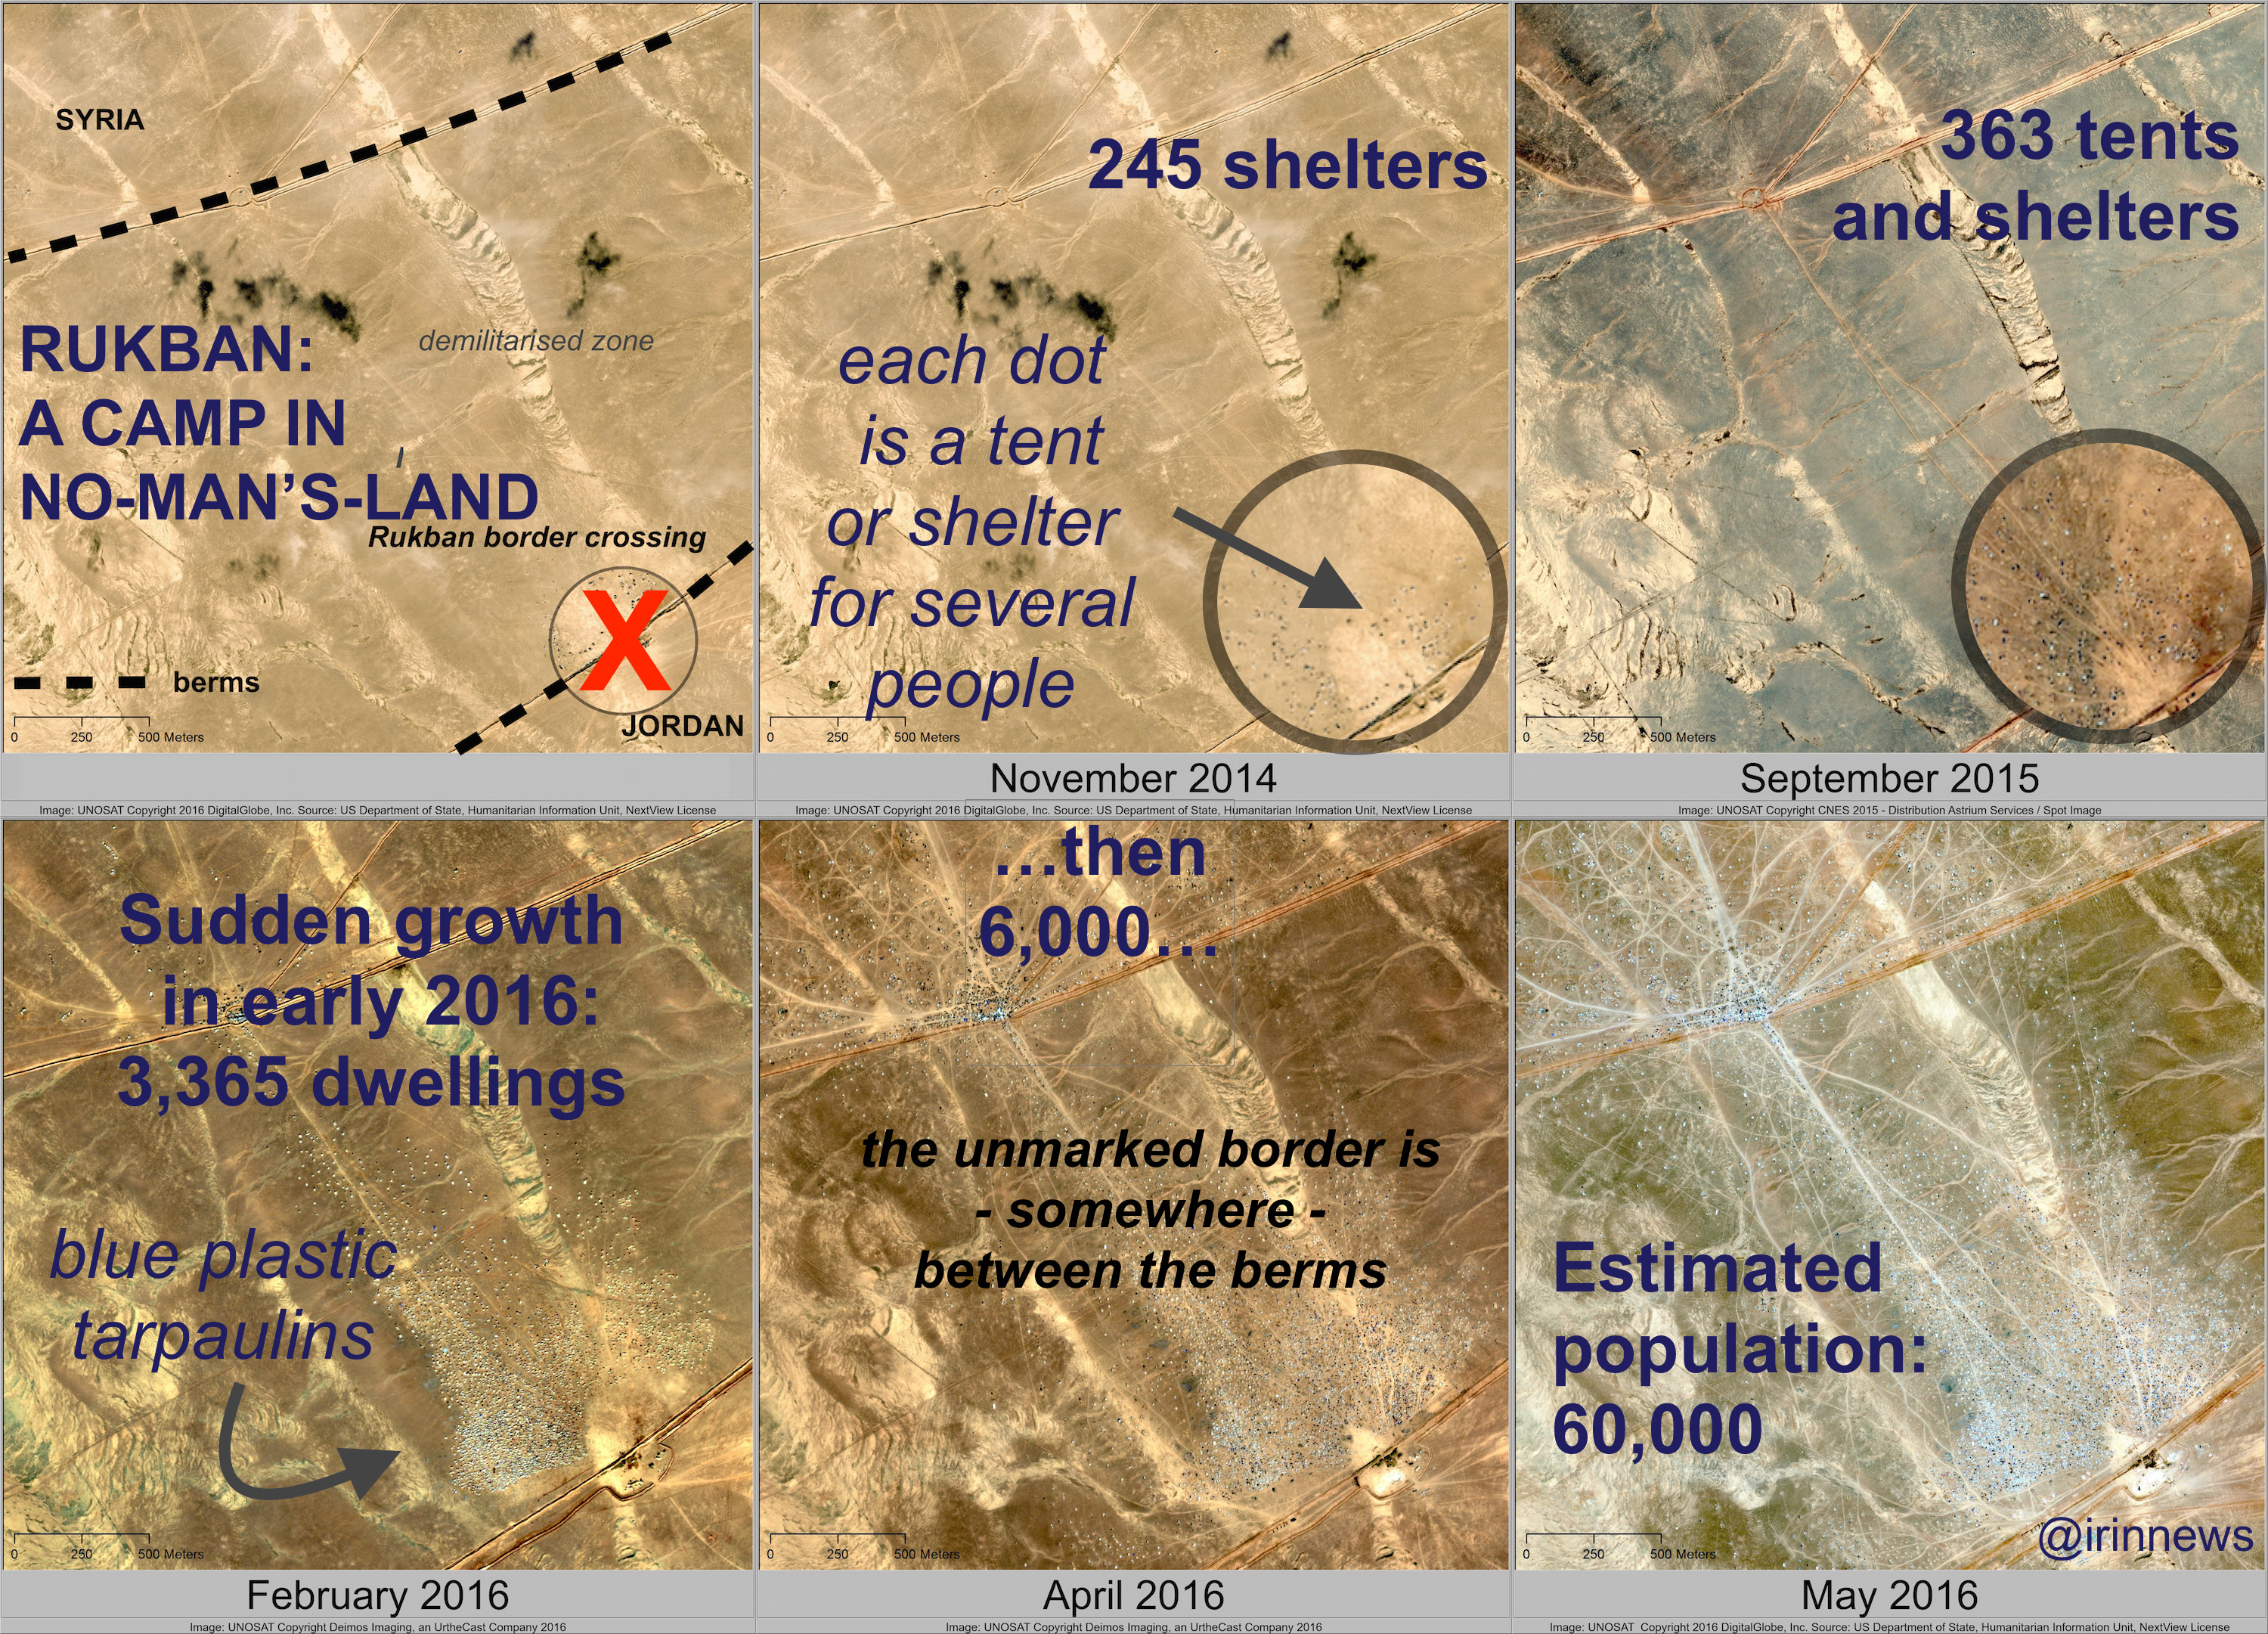 The growth of the Rukban settlement seen in satellite imagery